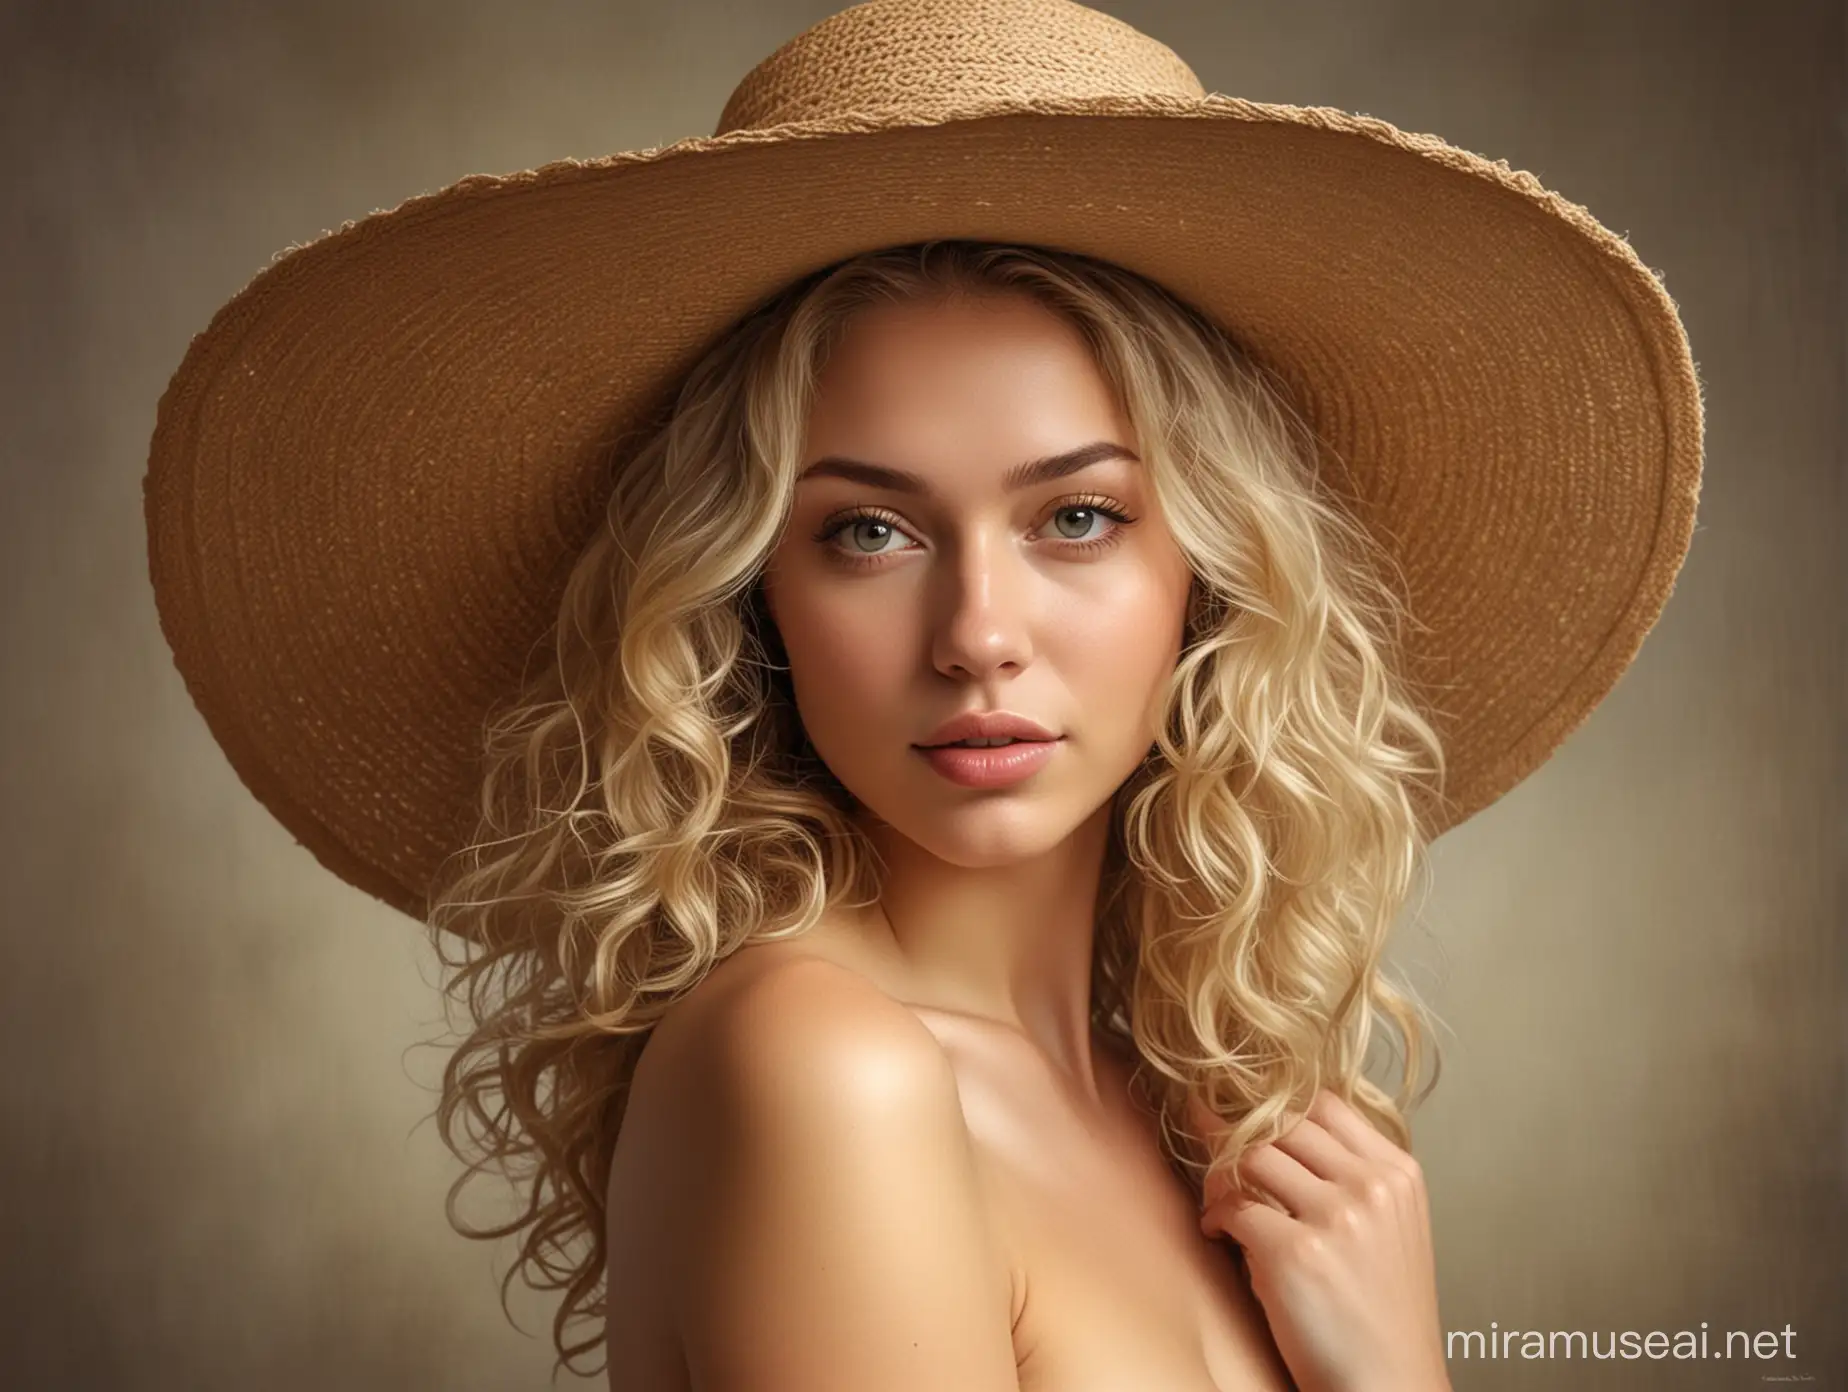 create a realistic image of a naked, beautiful woman with curly blonde hair, wearing a large hat, posing for an artist's portrait.